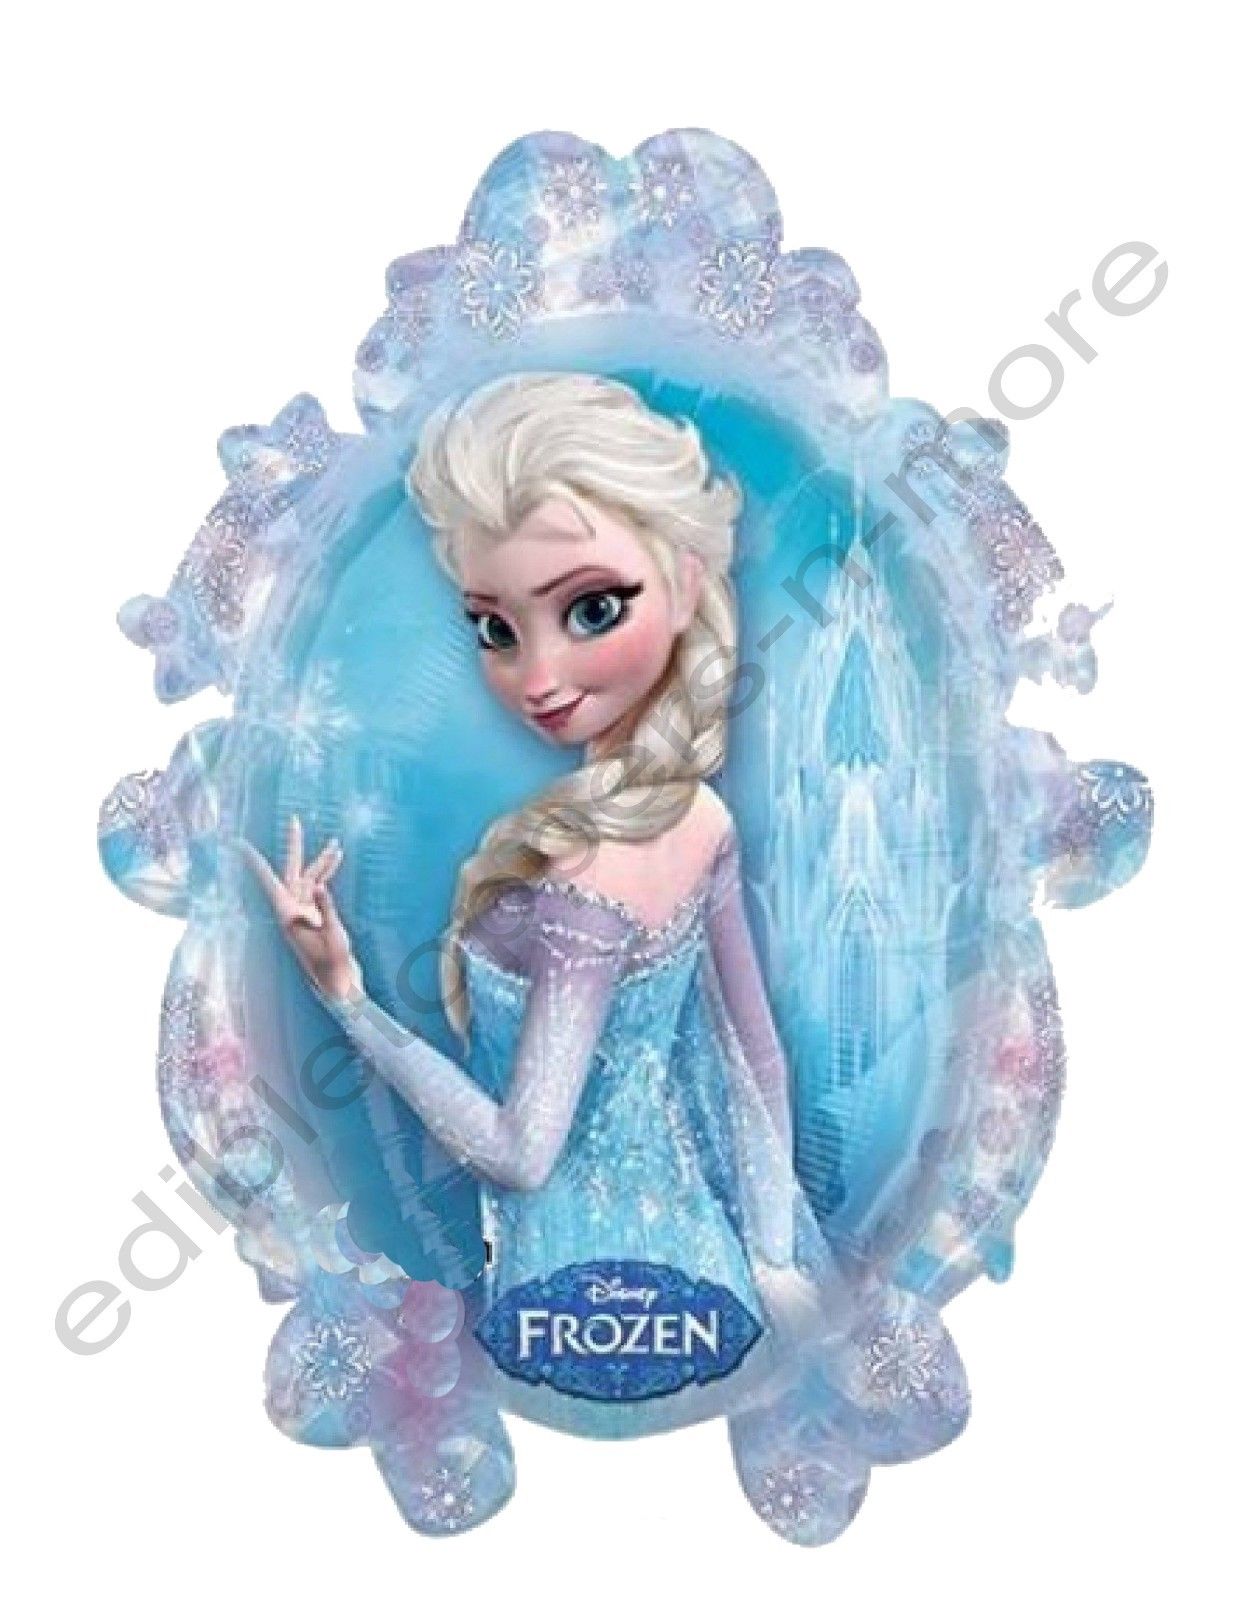 Disney's Frozen Elsa Personalized Edible Print Premium Cake Toppers Fr – Toppers & More